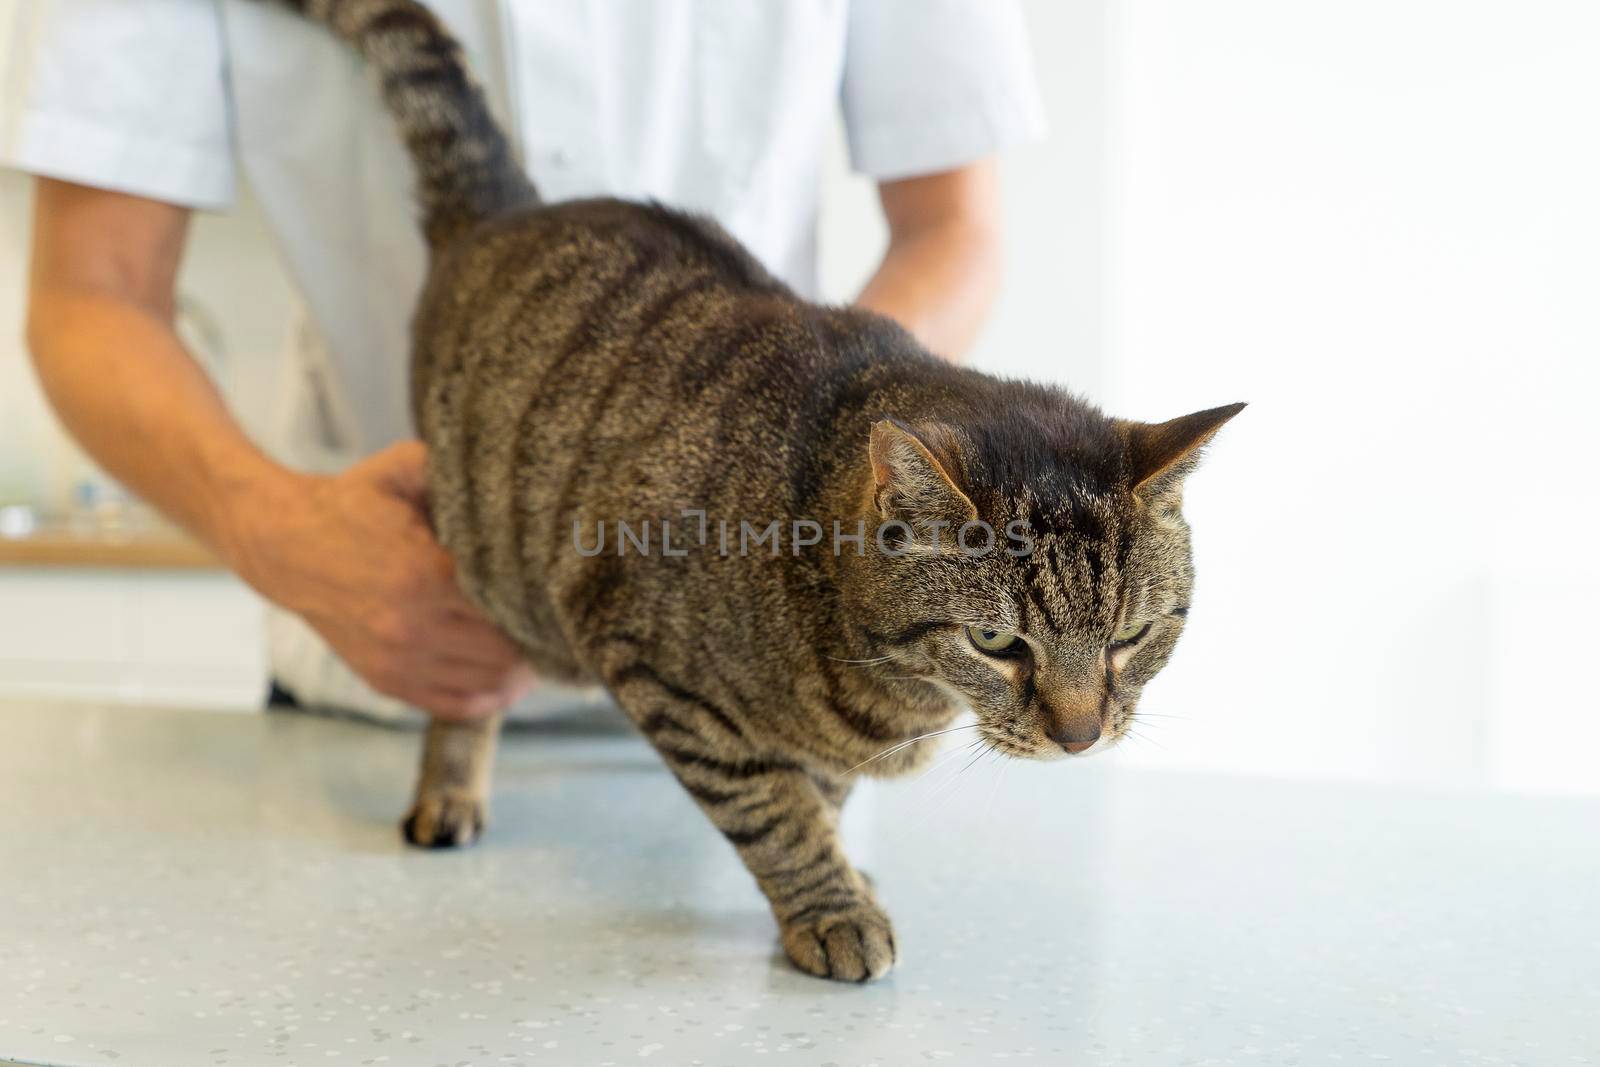 Tabby cat being examinated by an unrecognizable veterinarian who checks his hind paws, cat looks disturbed